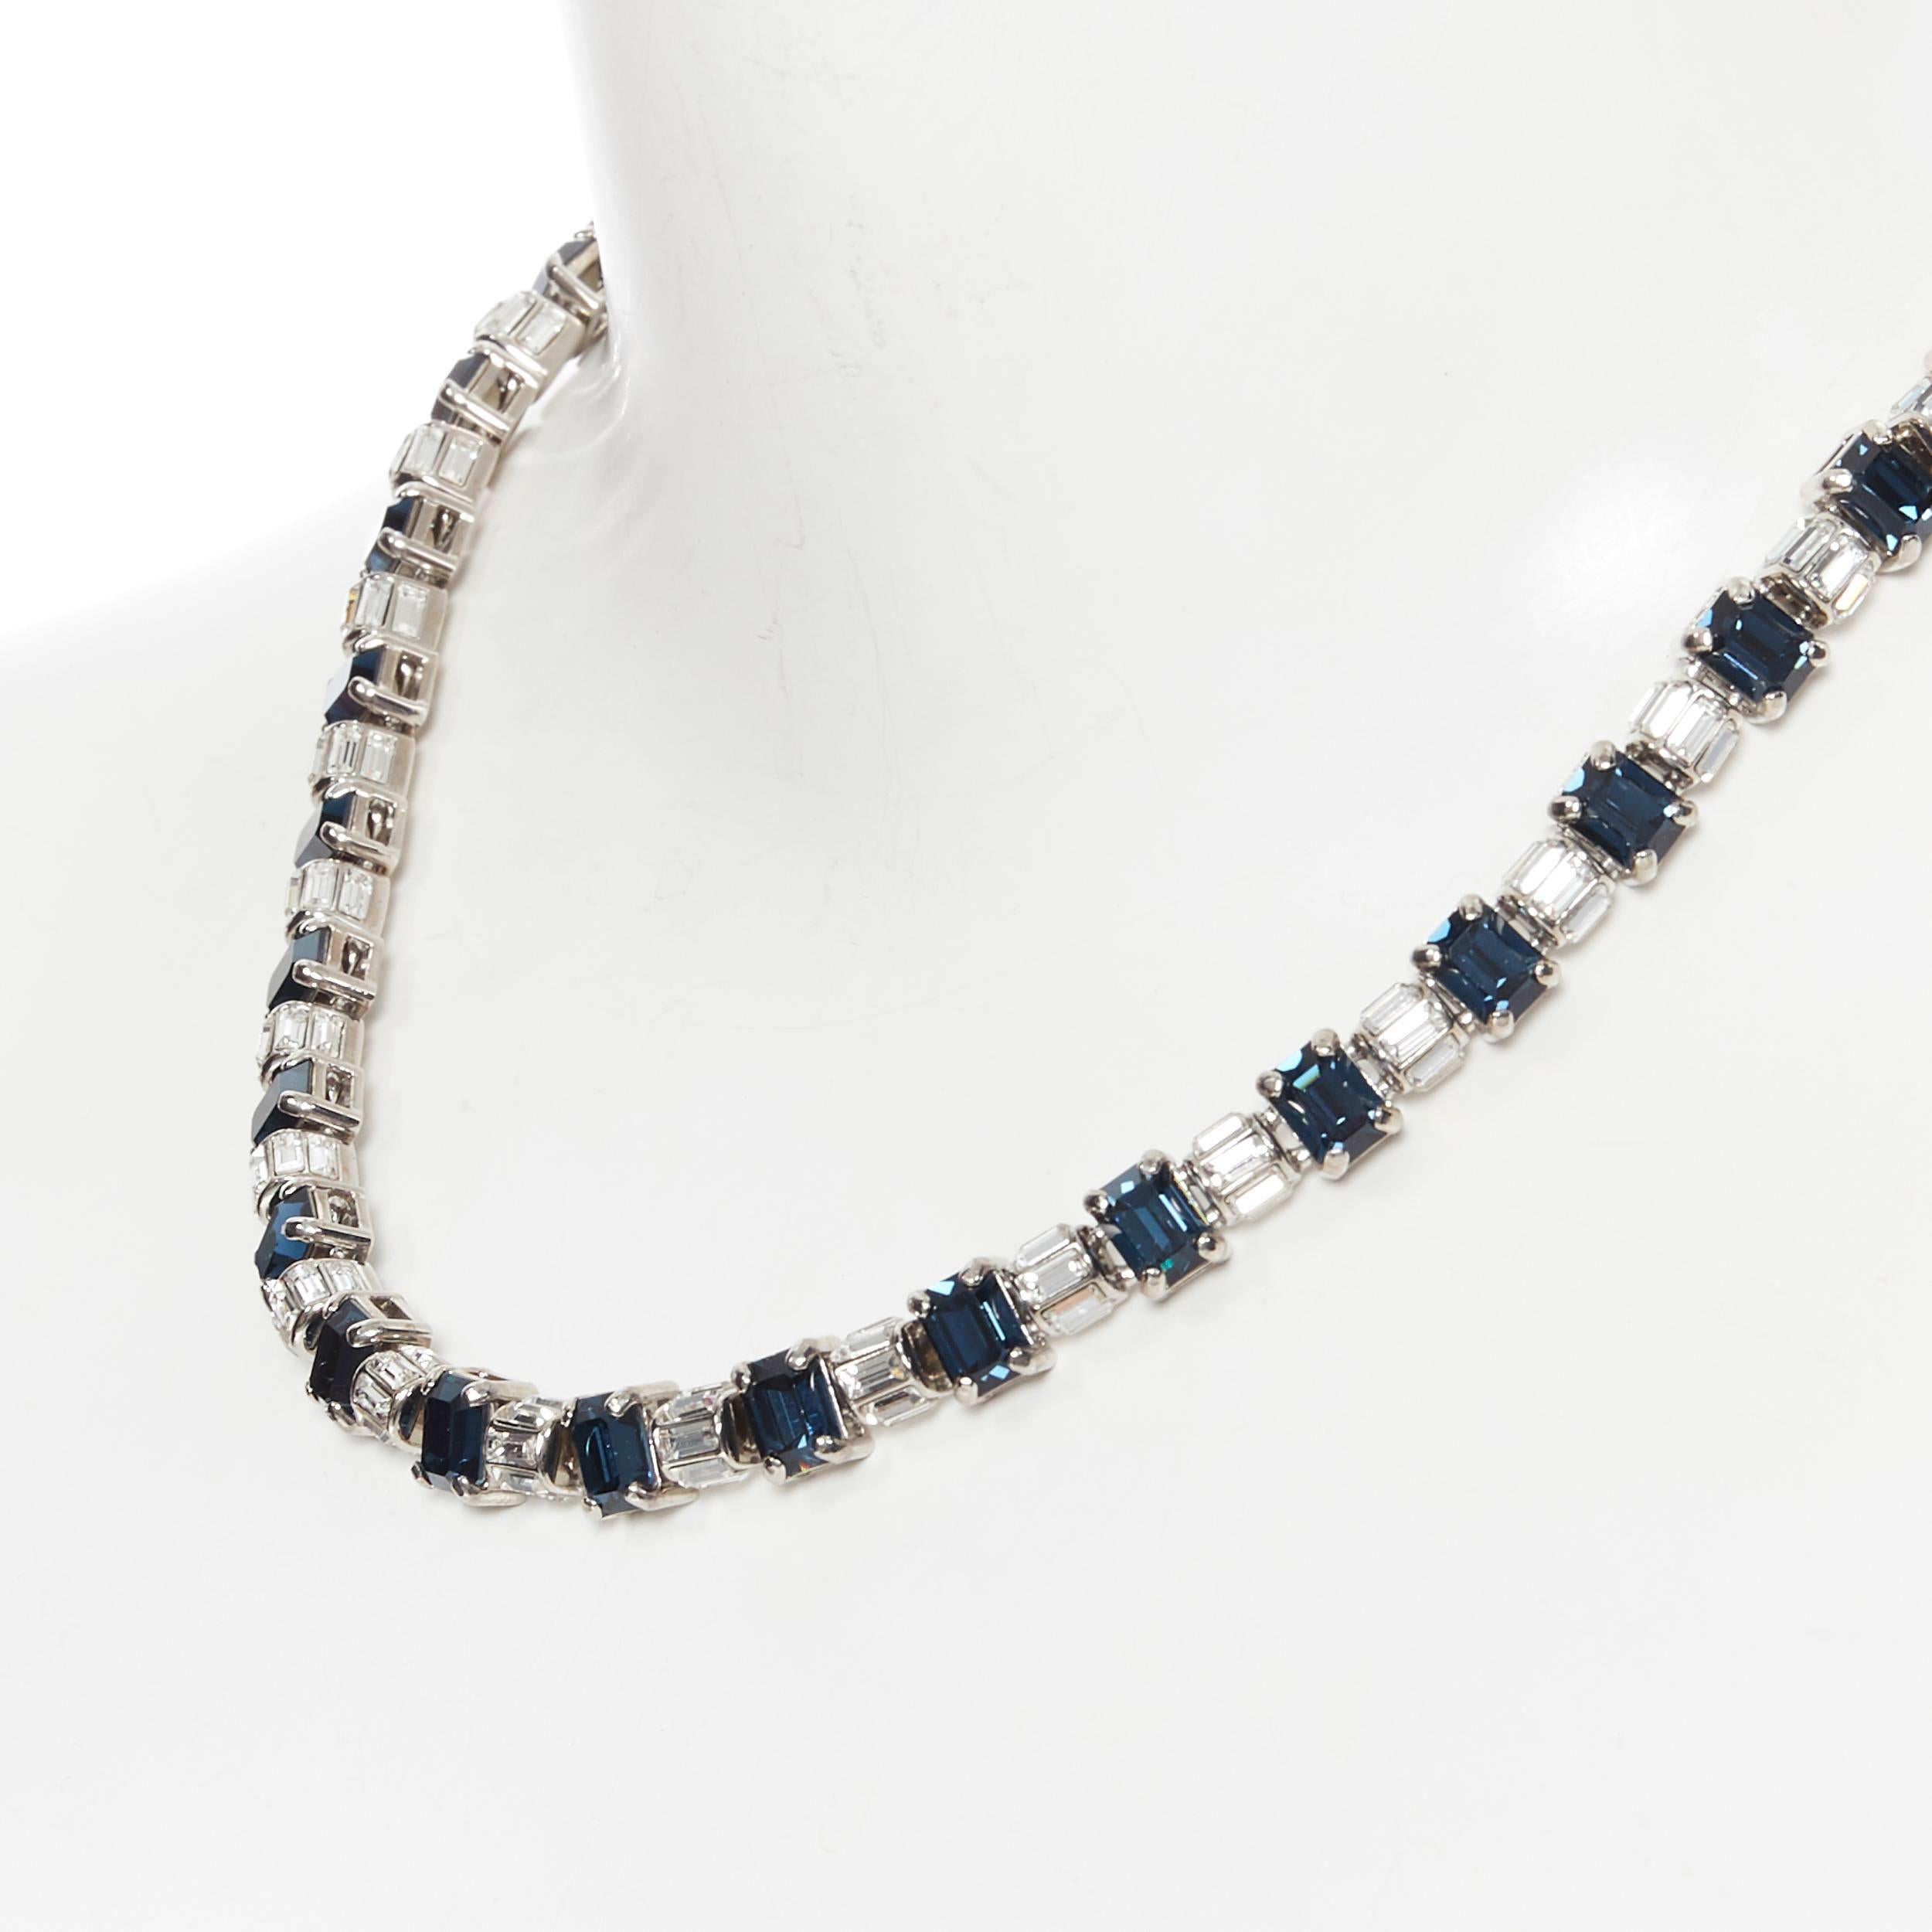 new PRADA clear sapphire  topaz blue crystal rhinestone baguette short necklace
Brand: Prada
Designer: Miuccia Prada
Model Name / Style: Crystal necklace
Material: Other; crystal
Color: Blue, clear
Pattern: Solid
Closure: Clasp
Extra Detail: Prada